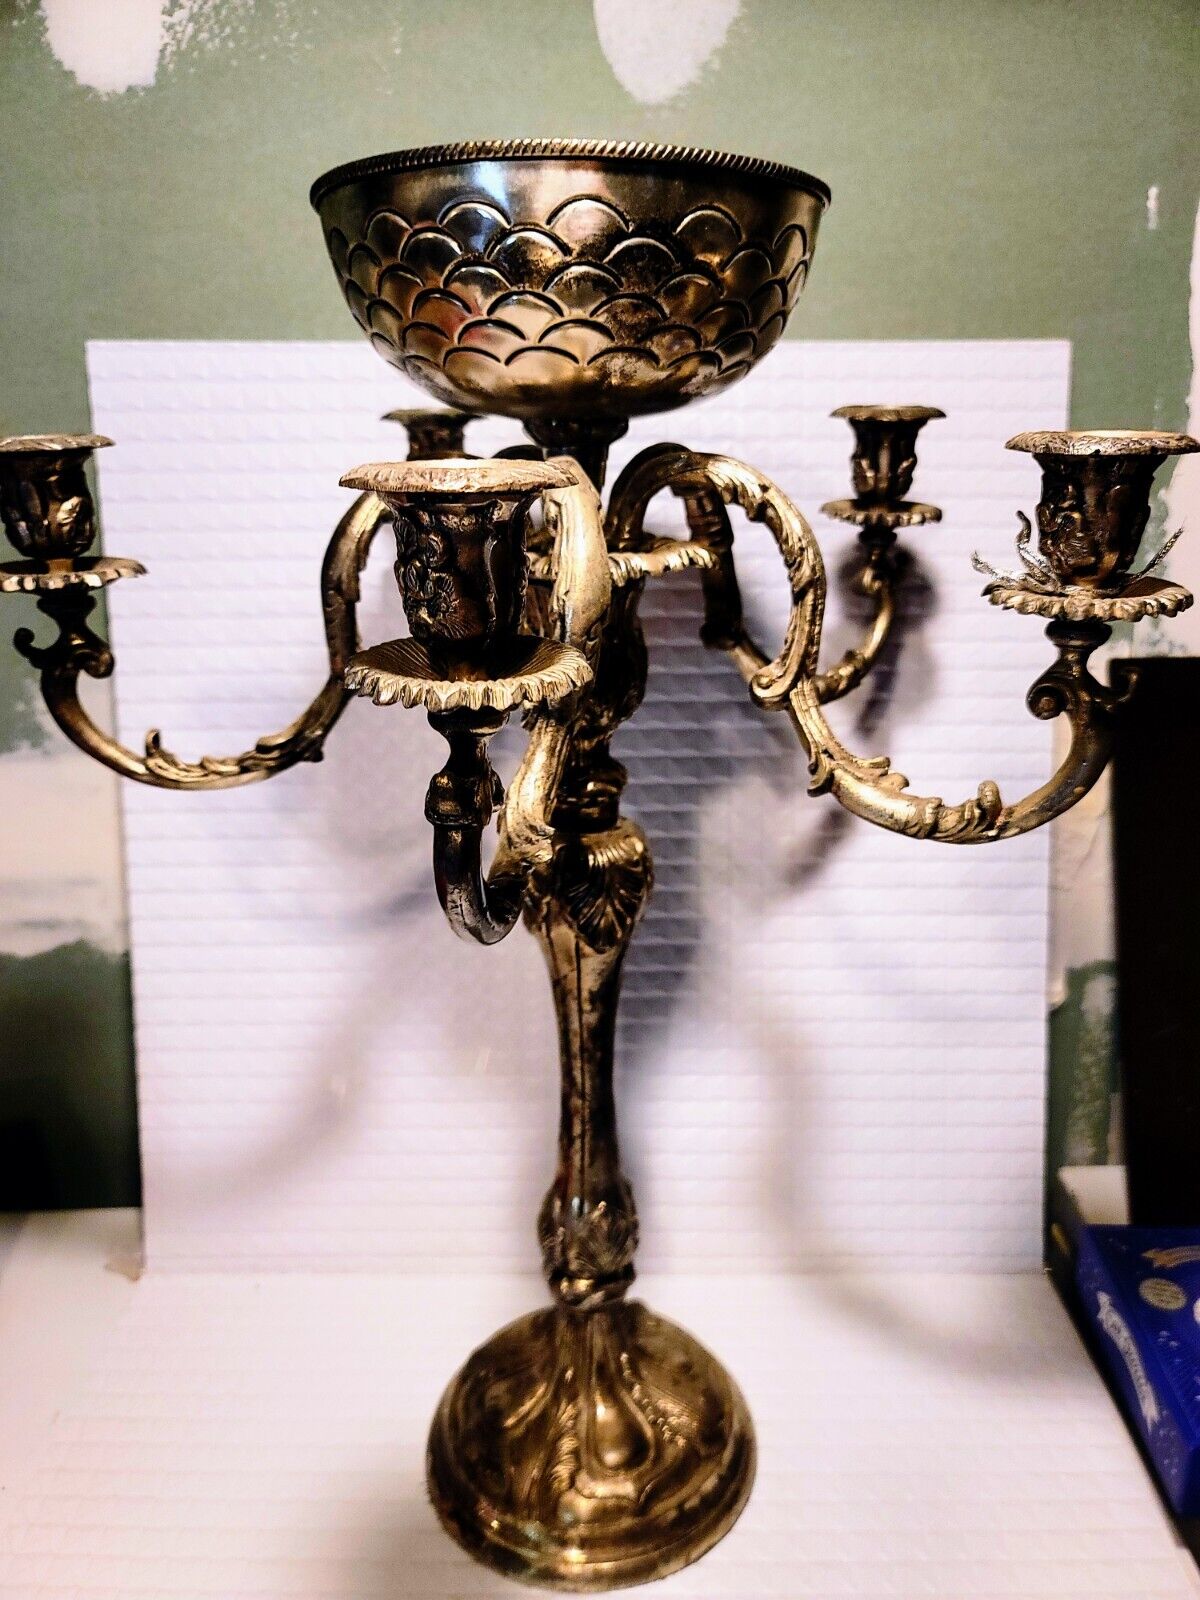 HUGE Gothic Standing Candelabra Candle Holder Silver Metal Holds 5 Heavy